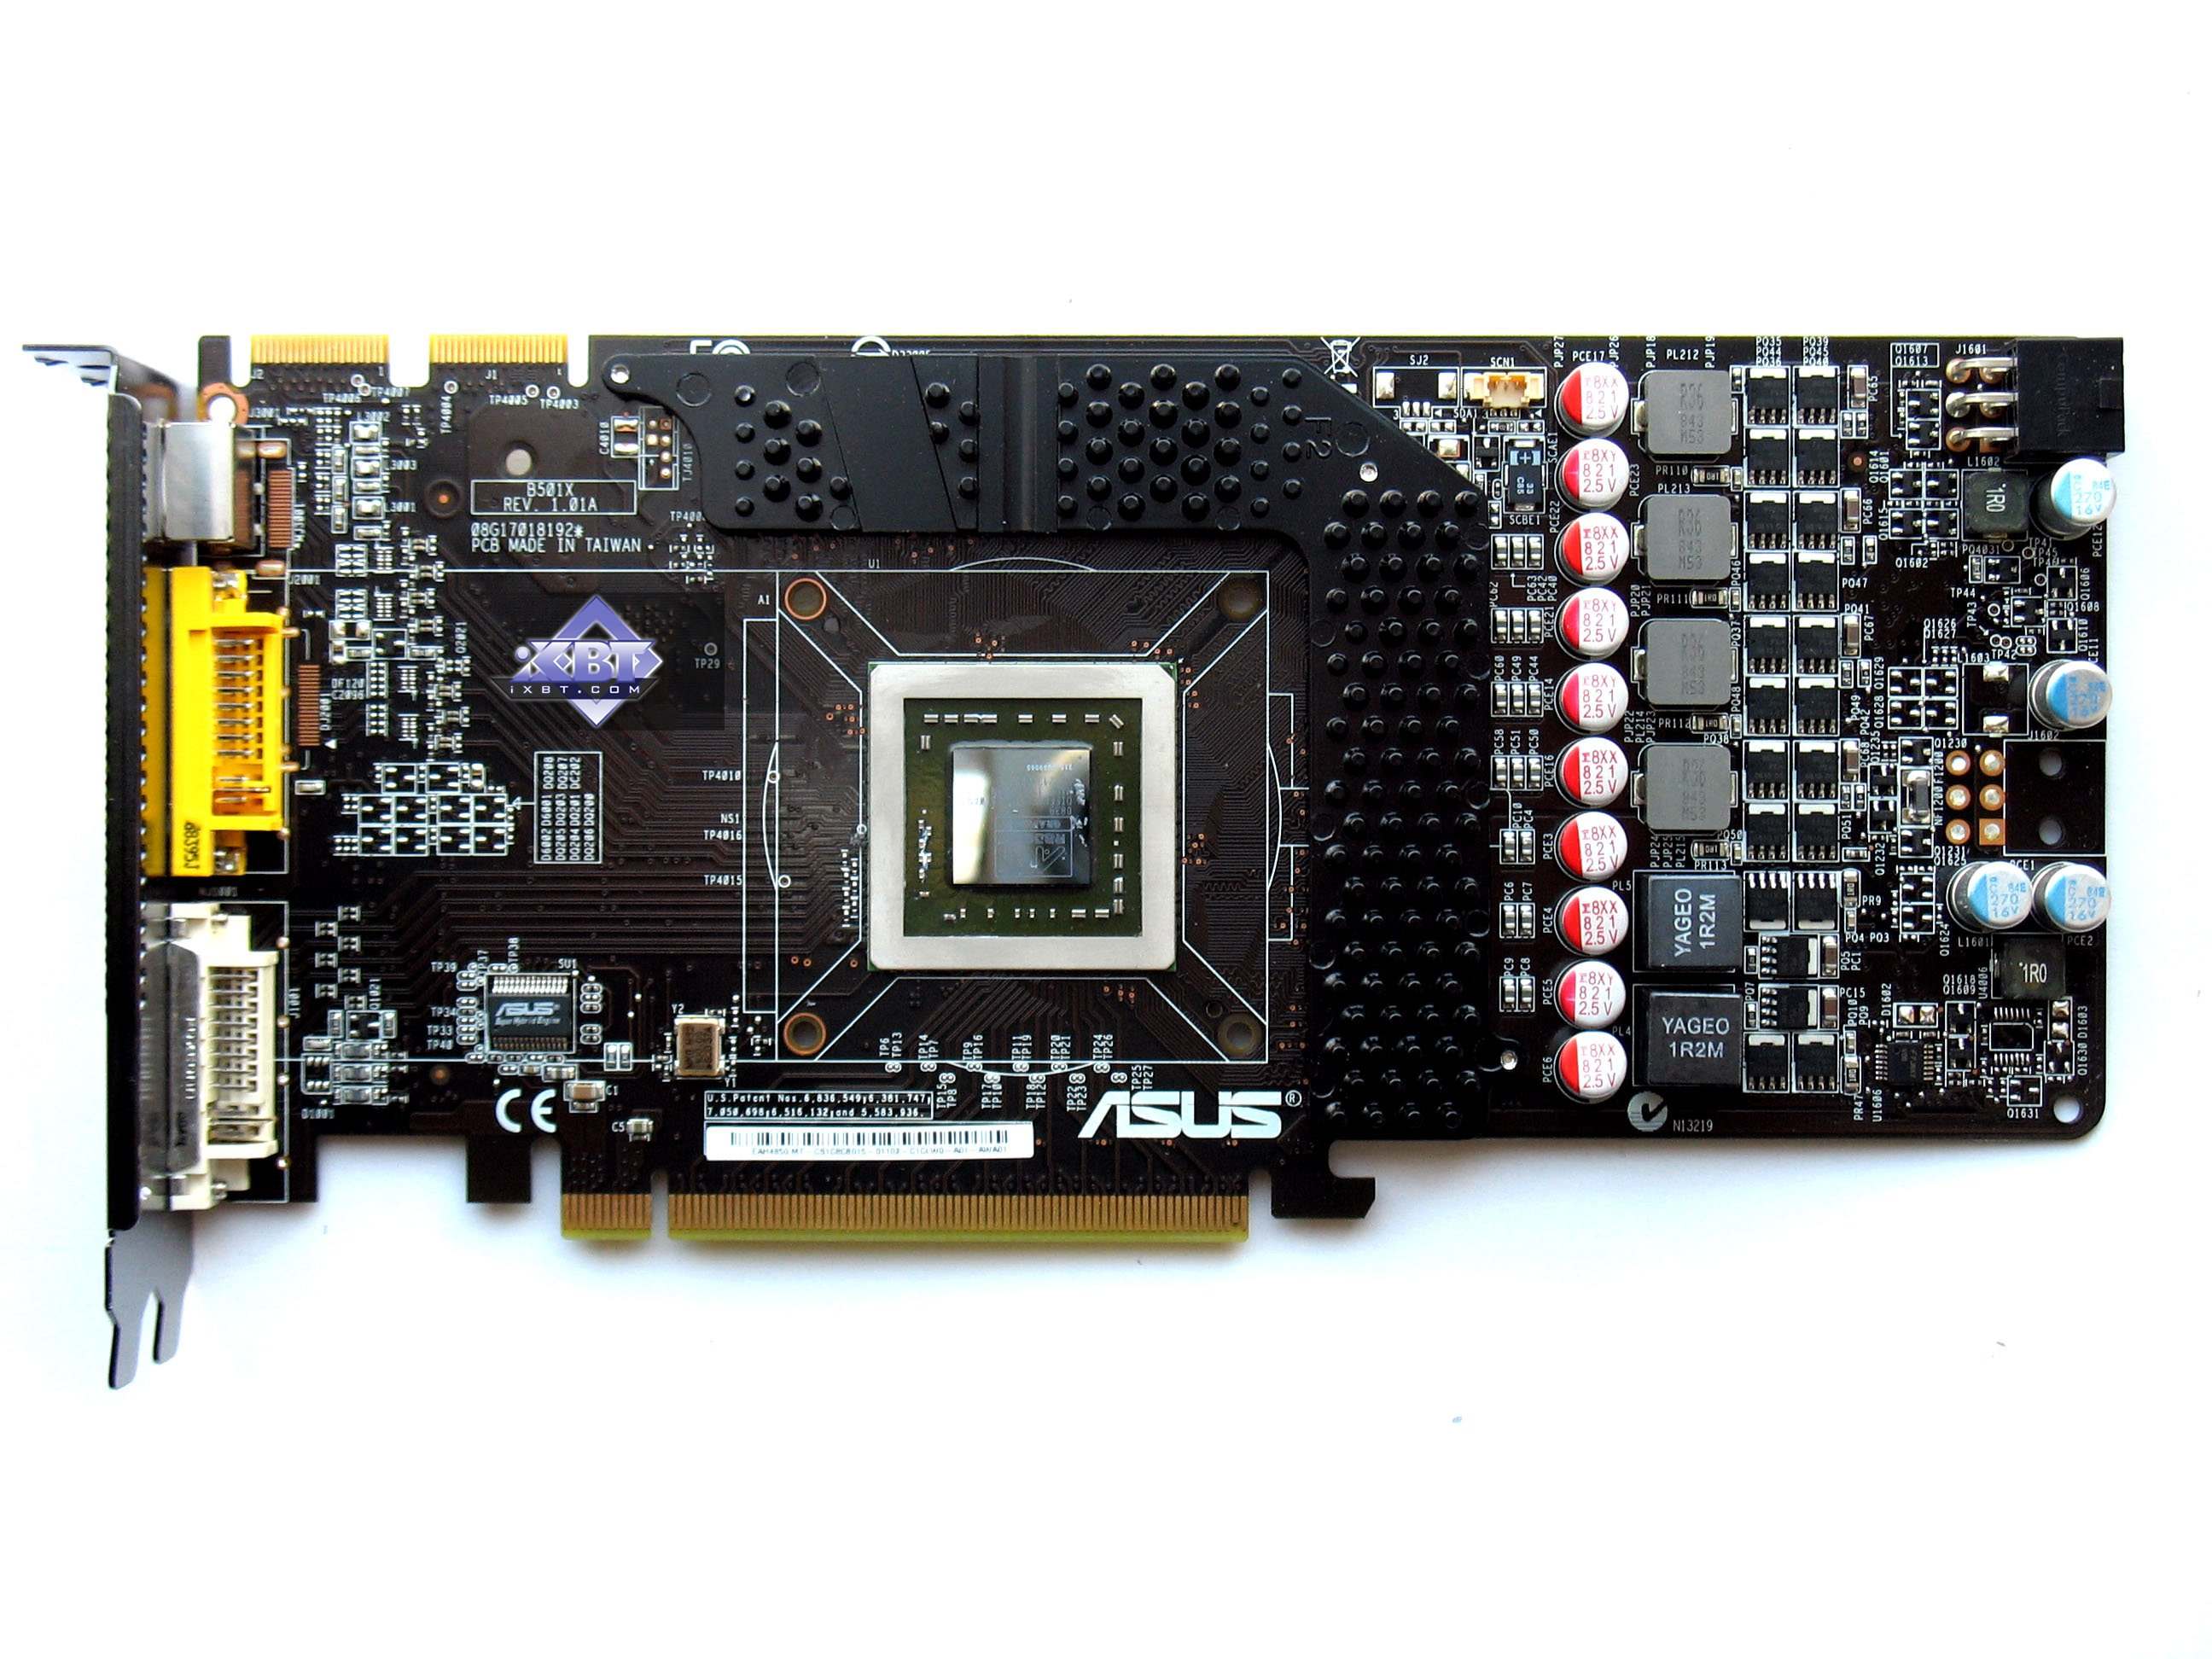 http://www.ixbt.com/video3/images/asus-10/asus-4850-scan-front.jpg